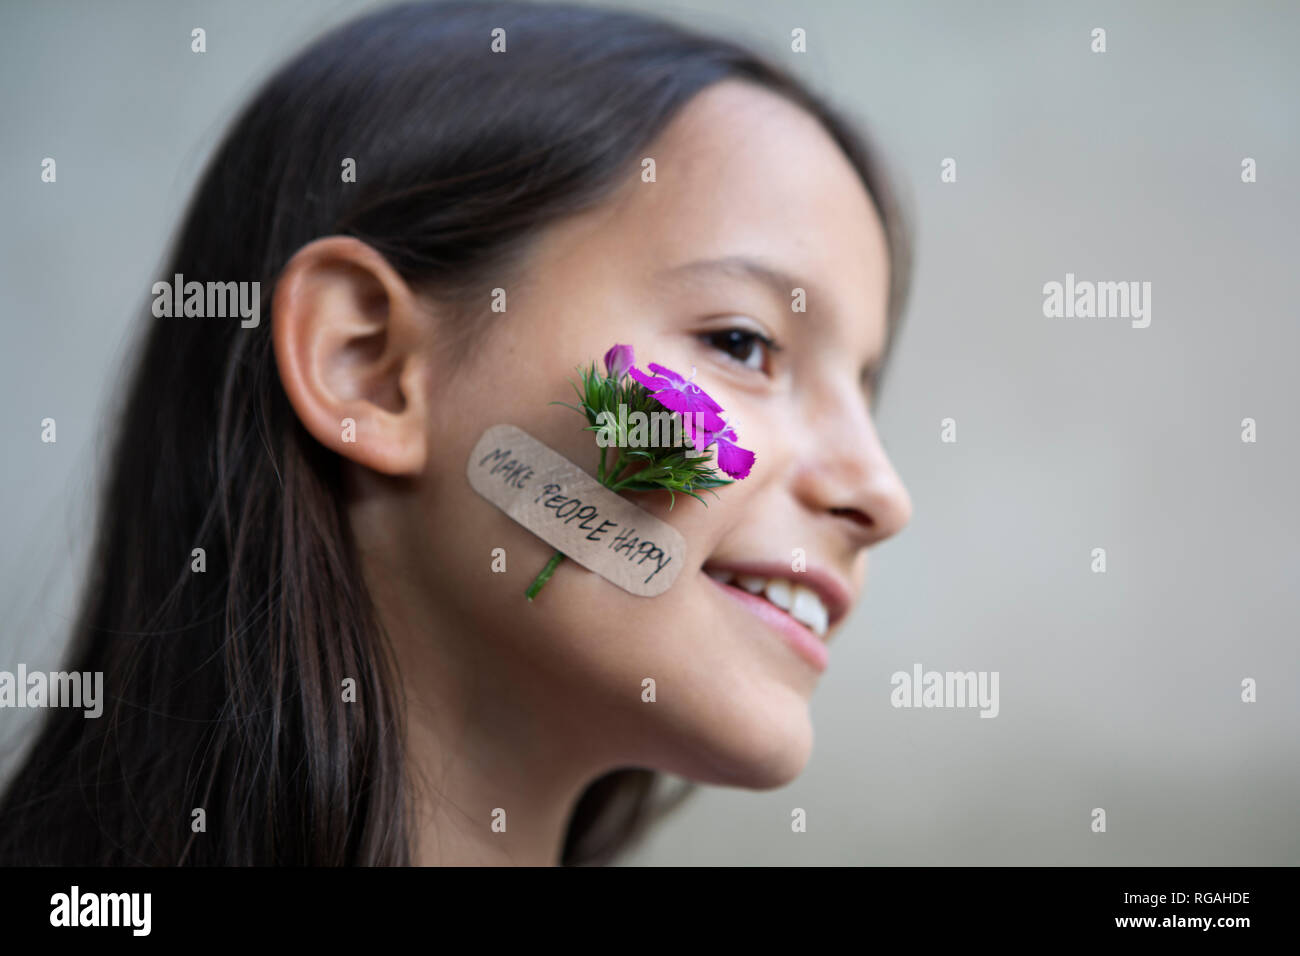 Portrait of smiling girl with flower head on her cheek Stock Photo